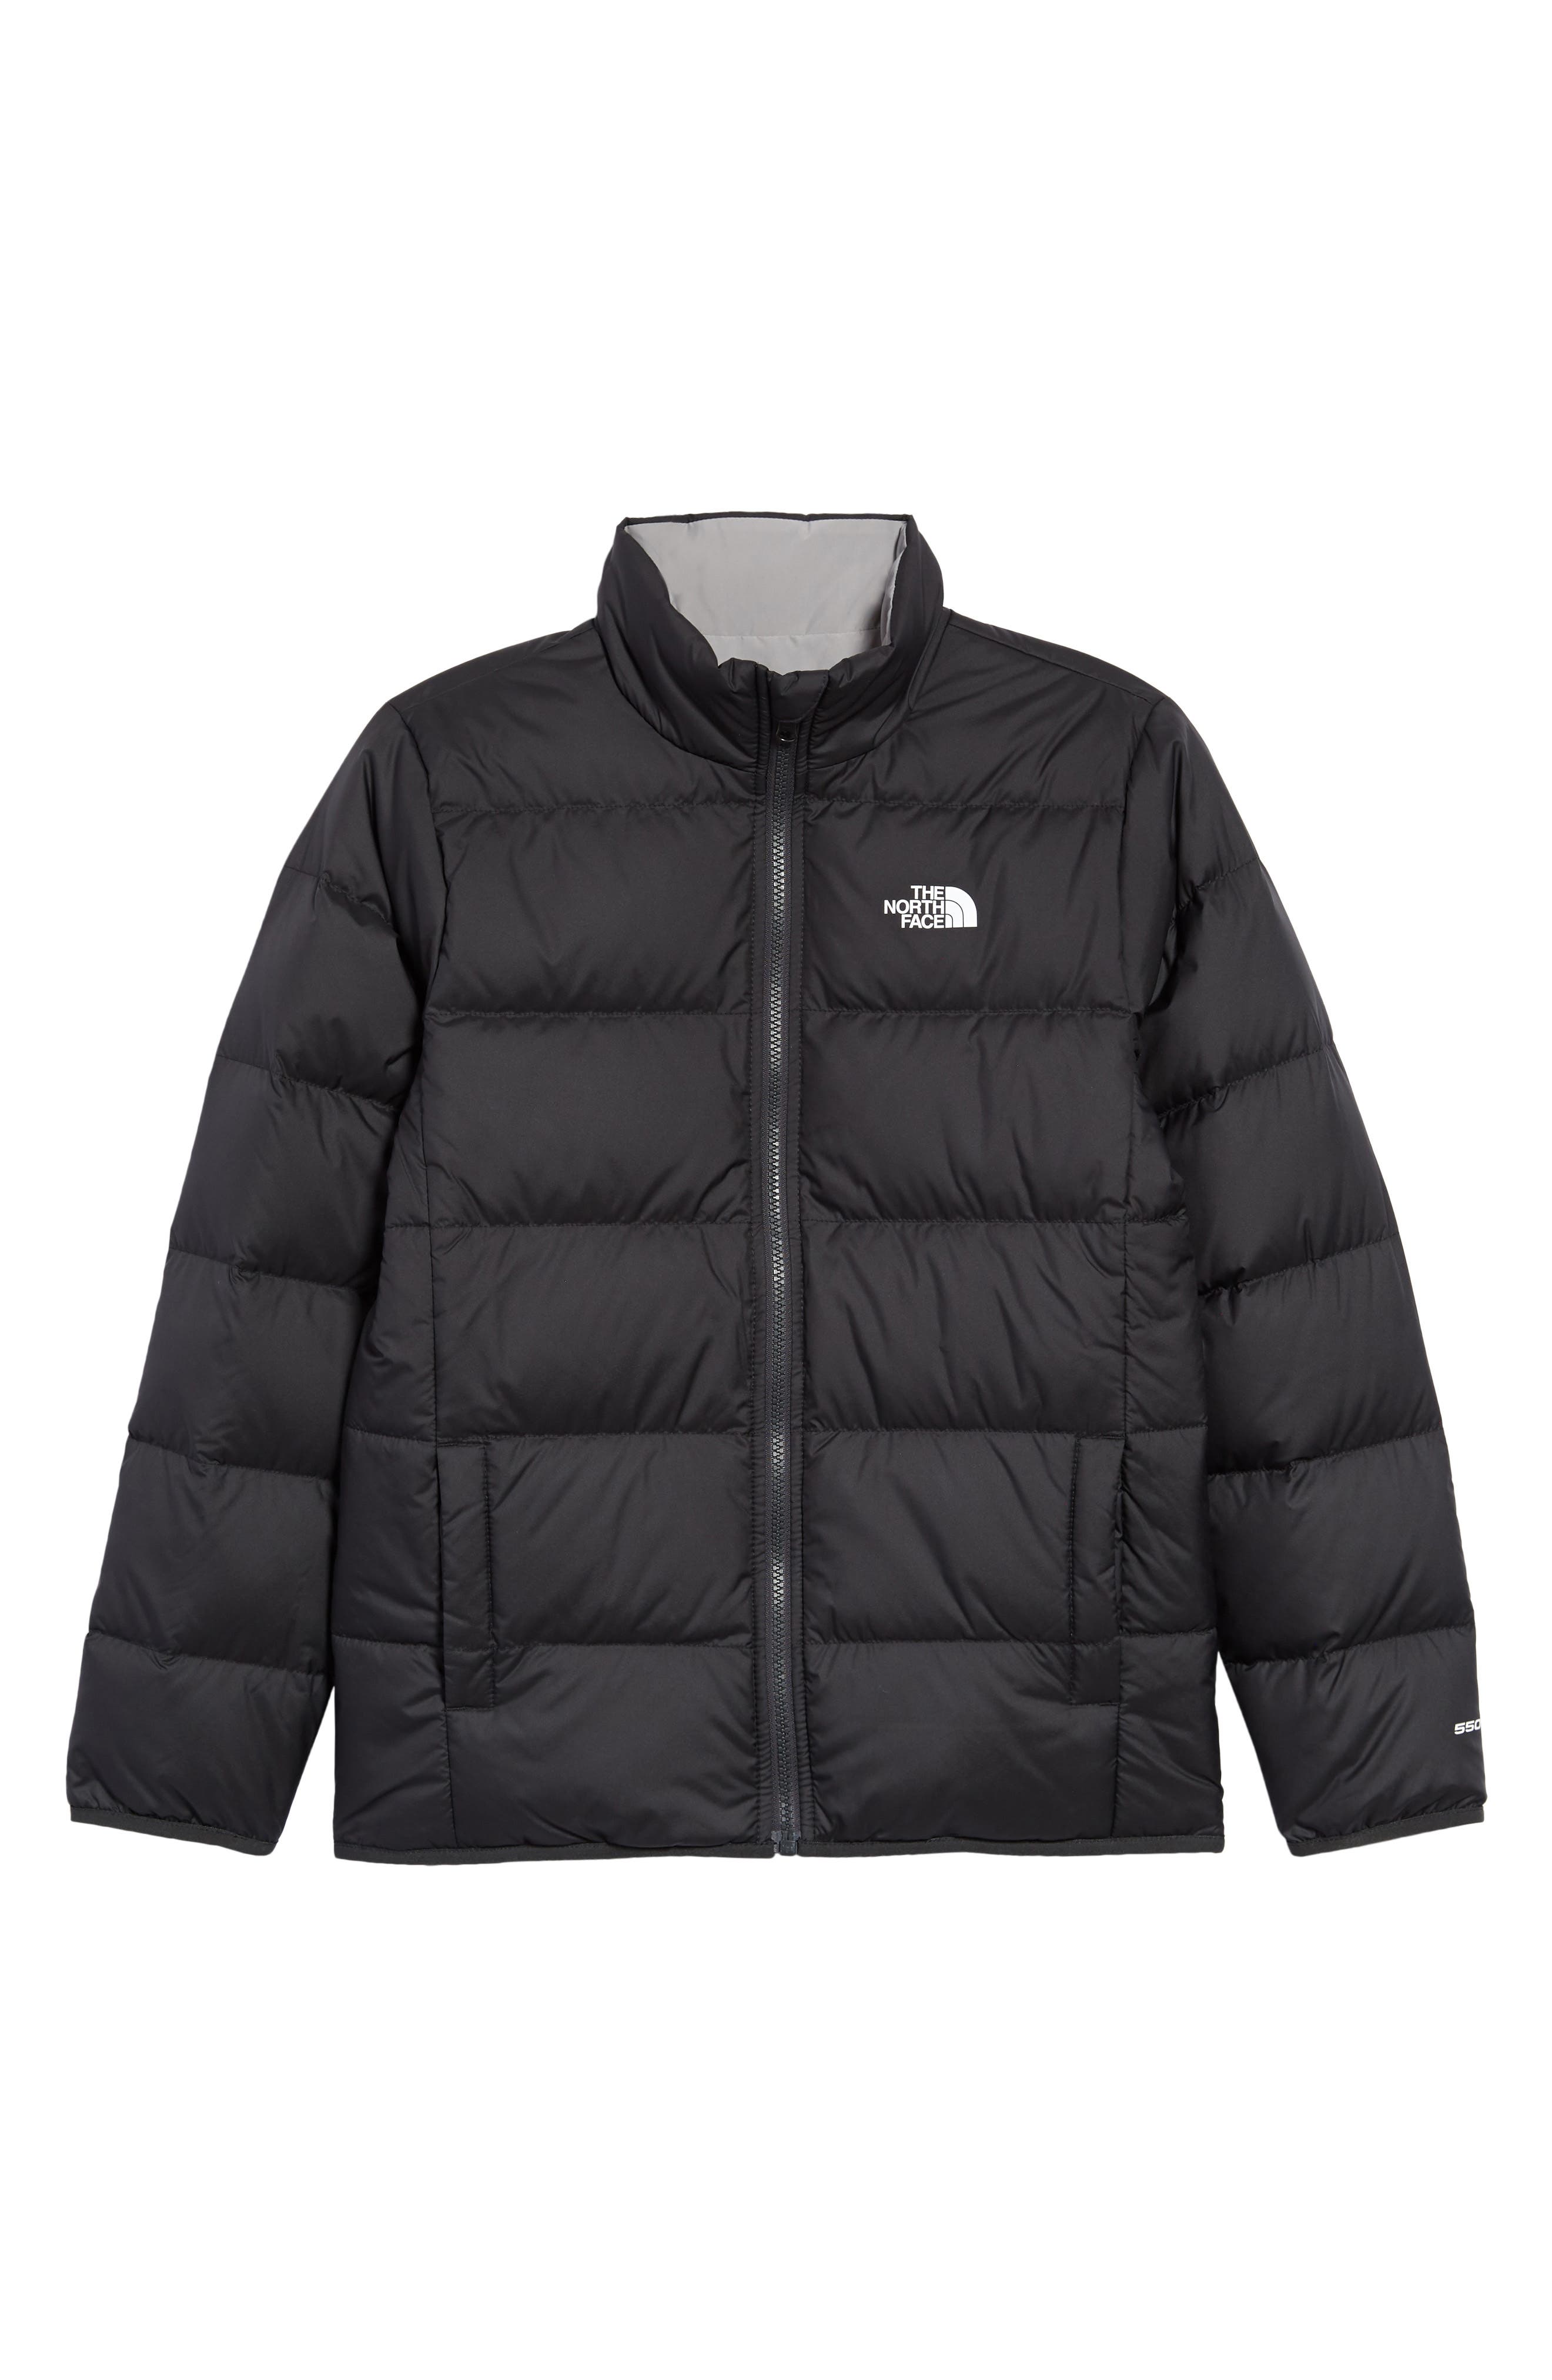 north face size 8